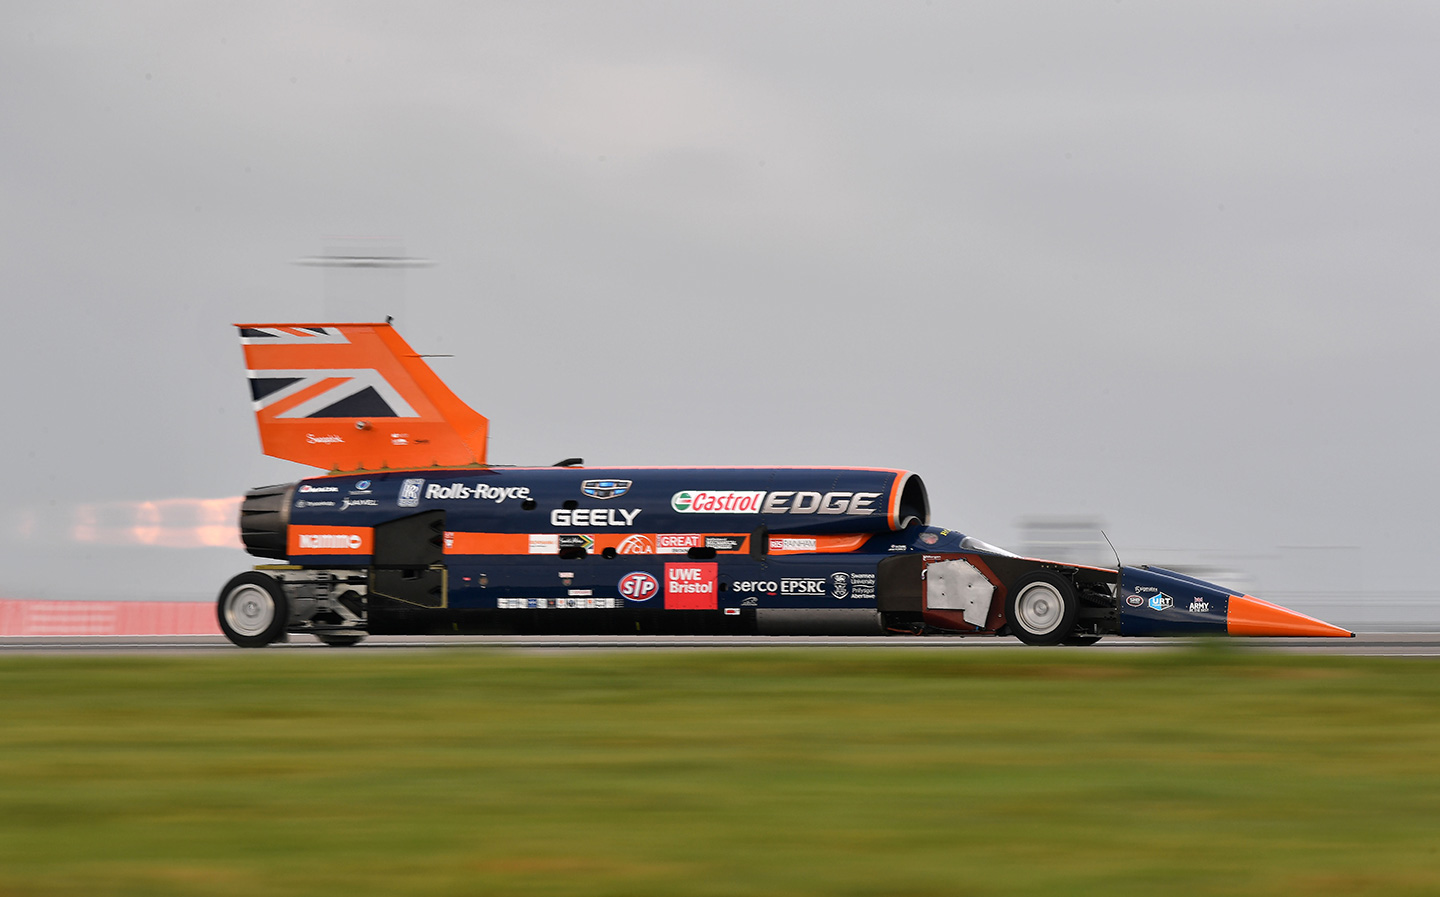 Bloodhound 1,000mph land speed record project enters administration